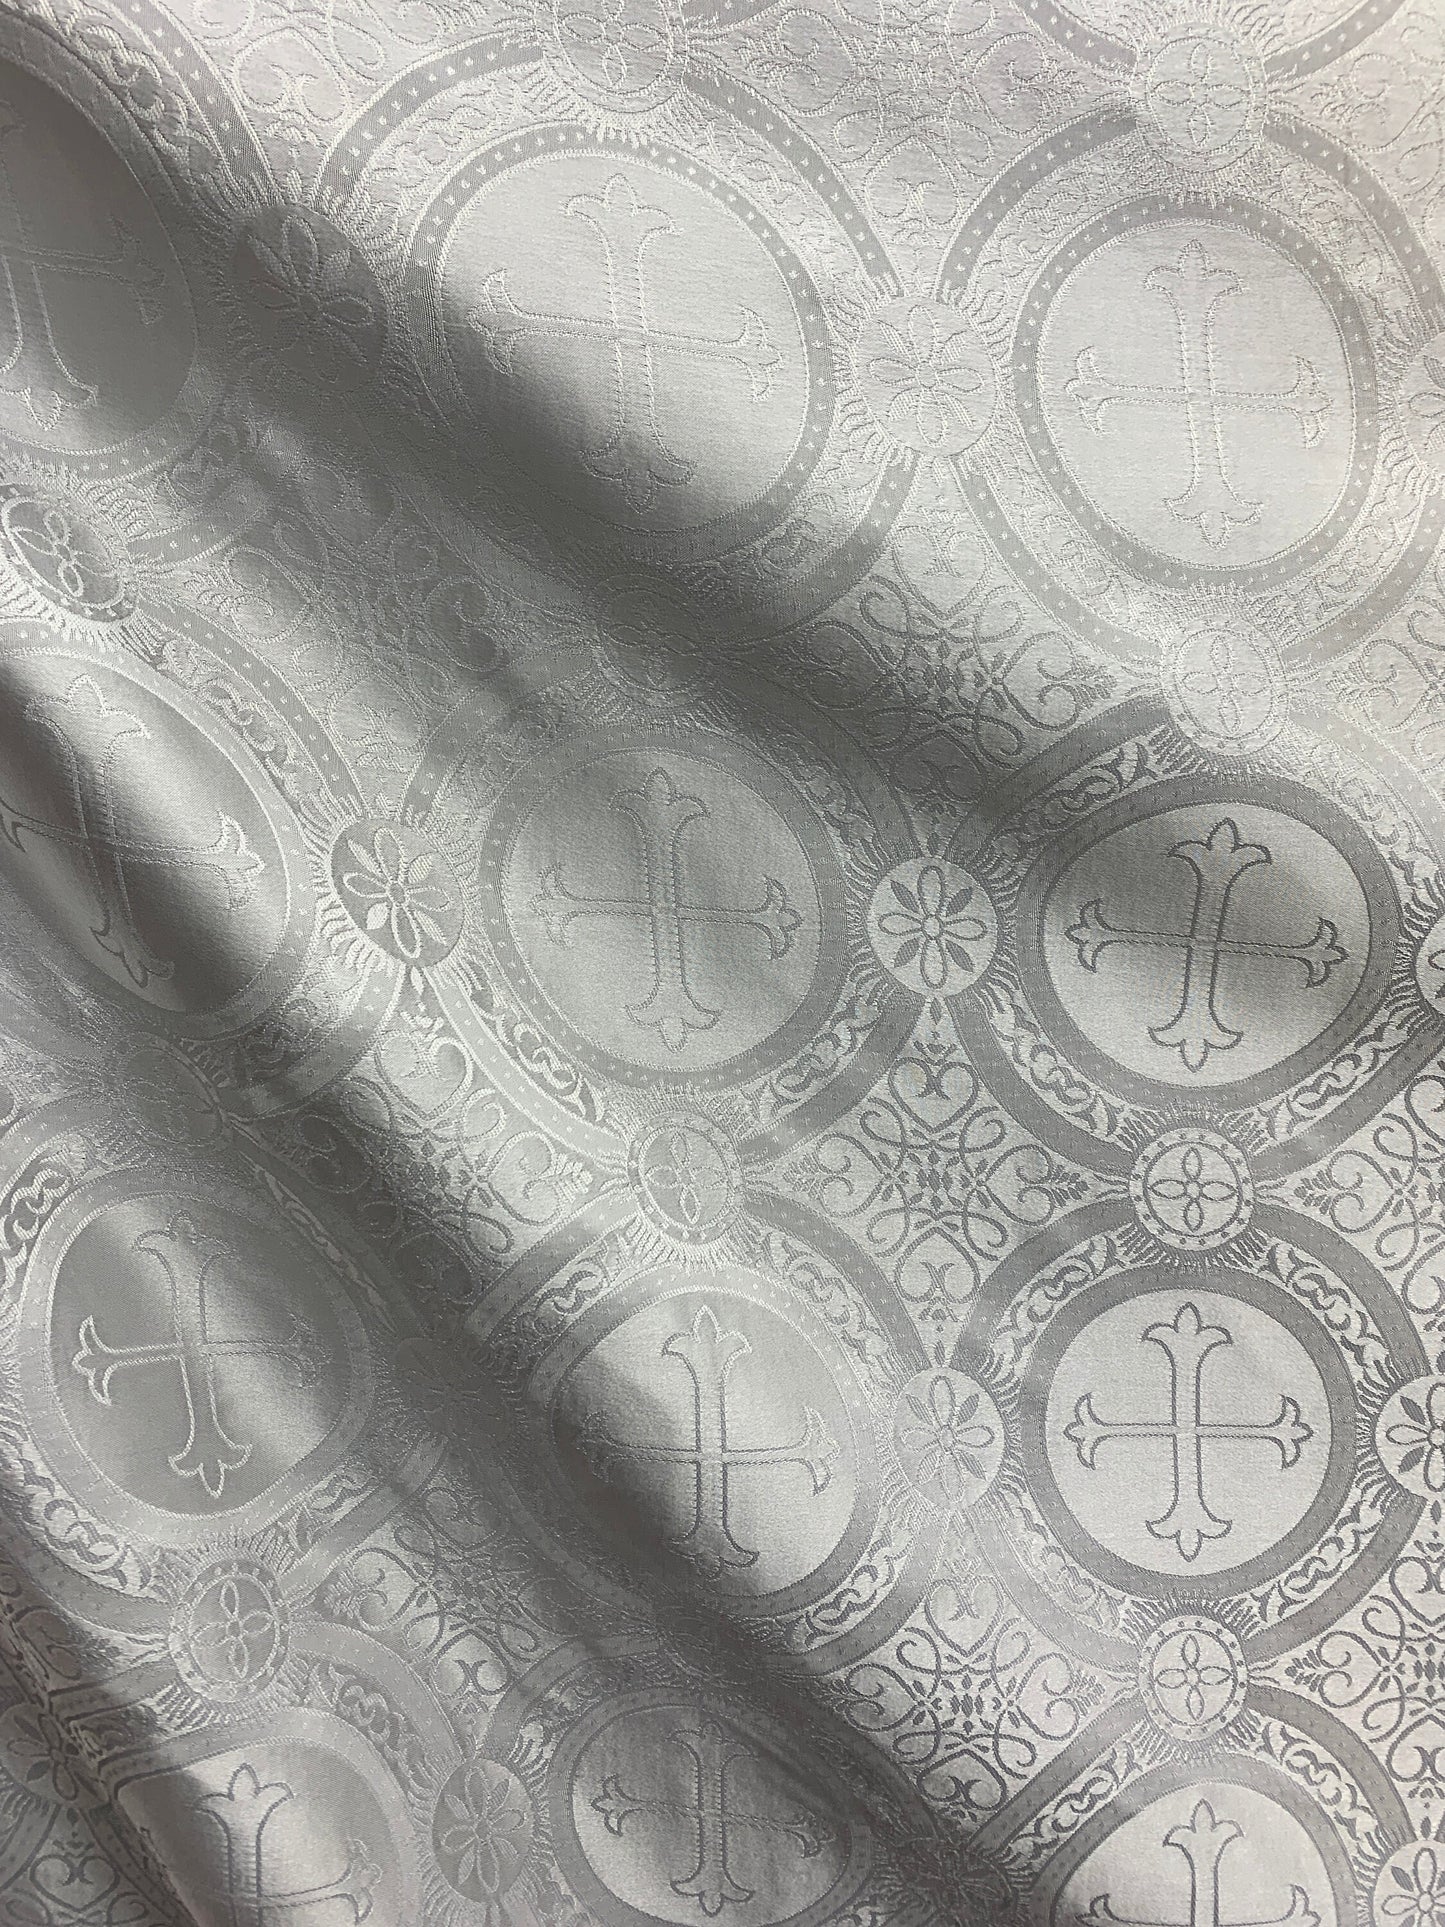 WHITE Liturgical Cross Brocade Fabric (55 in.) Sold By The Yard